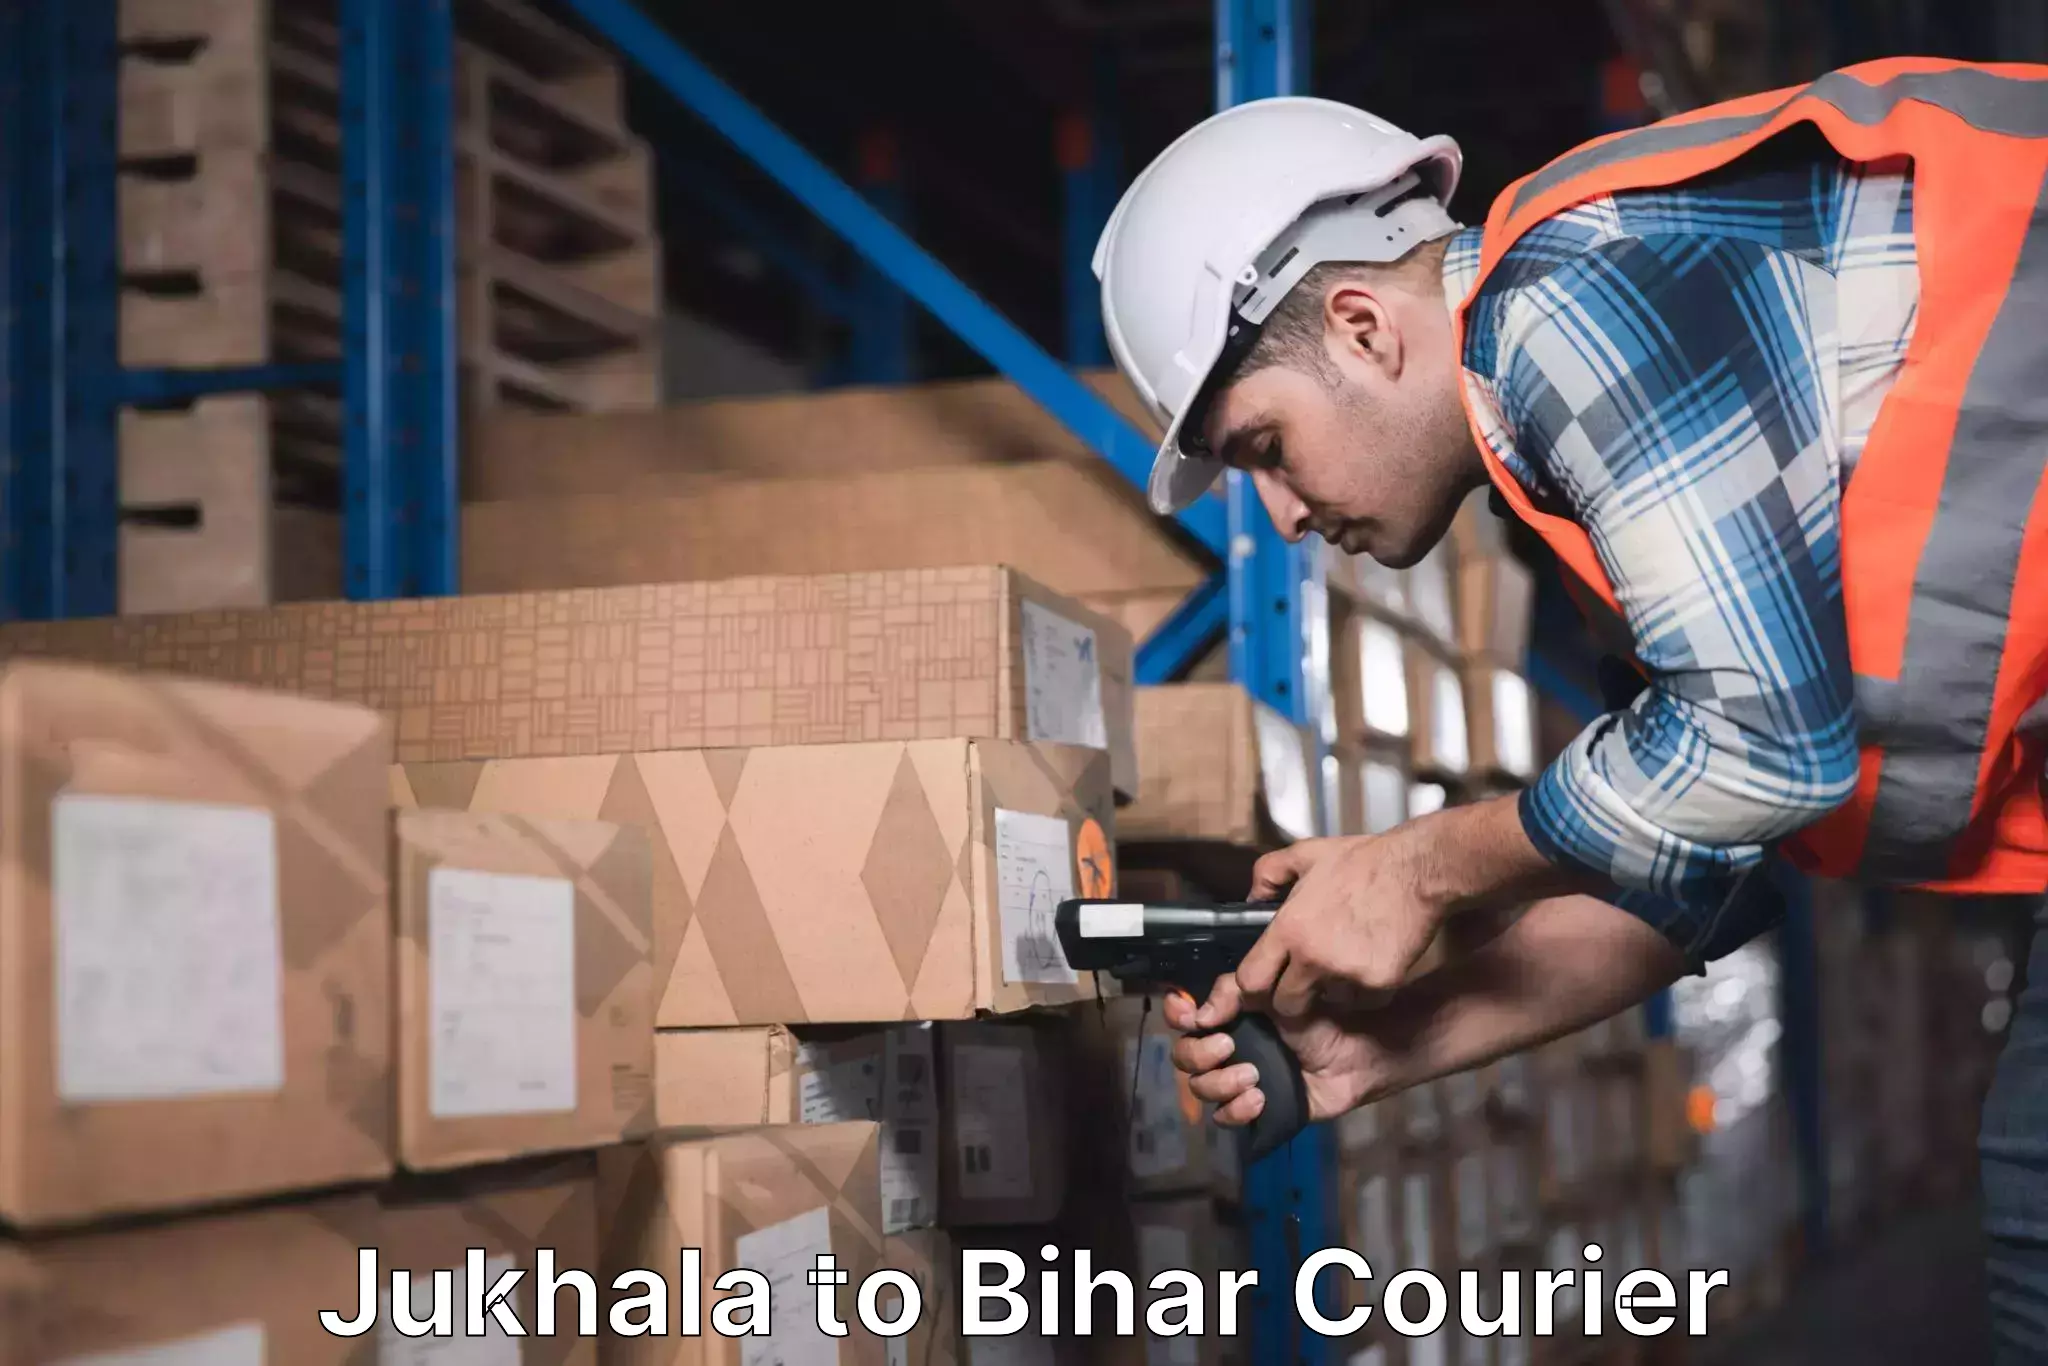 Courier dispatch services Jukhala to Kamtaul